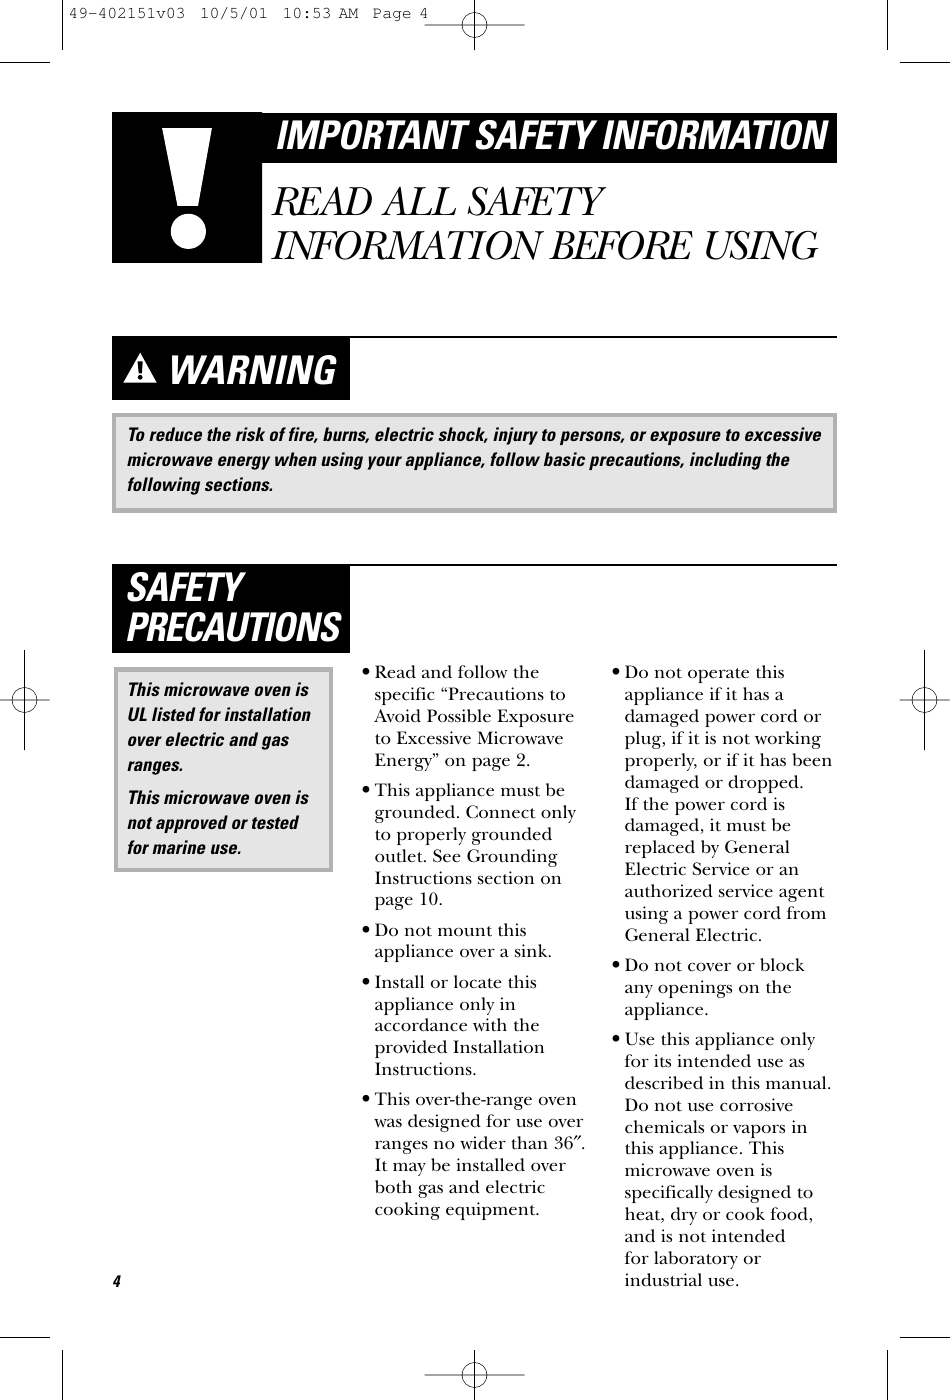 To reduce the risk of fire, burns, electric shock, injury to persons, or exposure to excessivemicrowave energy when using your appliance, follow basic precautions, including thefollowing sections.WARNING•Read and follow thespecific “Precautions toAvoid Possible Exposureto Excessive MicrowaveEnergy” on page 2.•This appliance must begrounded. Connect onlyto properly groundedoutlet. See GroundingInstructions section onpage 10.•Do not mount thisappliance over a sink. •Install or locate thisappliance only inaccordance with theprovided InstallationInstructions.•This over-the-range ovenwas designed for use overranges no wider than 36″.It may be installed overboth gas and electriccooking equipment.•Do not operate thisappliance if it has adamaged power cord orplug, if it is not workingproperly, or if it has beendamaged or dropped. If the power cord isdamaged, it must bereplaced by GeneralElectric Service or anauthorized service agentusing a power cord fromGeneral Electric.•Do not cover or block any openings on theappliance.•Use this appliance onlyfor its intended use asdescribed in this manual.Do not use corrosivechemicals or vapors inthis appliance. Thismicrowave oven isspecifically designed toheat, dry or cook food,and is not intended for laboratory orindustrial use.This microwave oven isUL listed for installationover electric and gasranges.This microwave oven isnot approved or testedfor marine use.SAFETYPRECAUTIONS4IMPORTANT SAFETY INFORMATIONREAD ALL SAFETYINFORMATION BEFORE USING49-402151v03  10/5/01  10:53 AM  Page 4